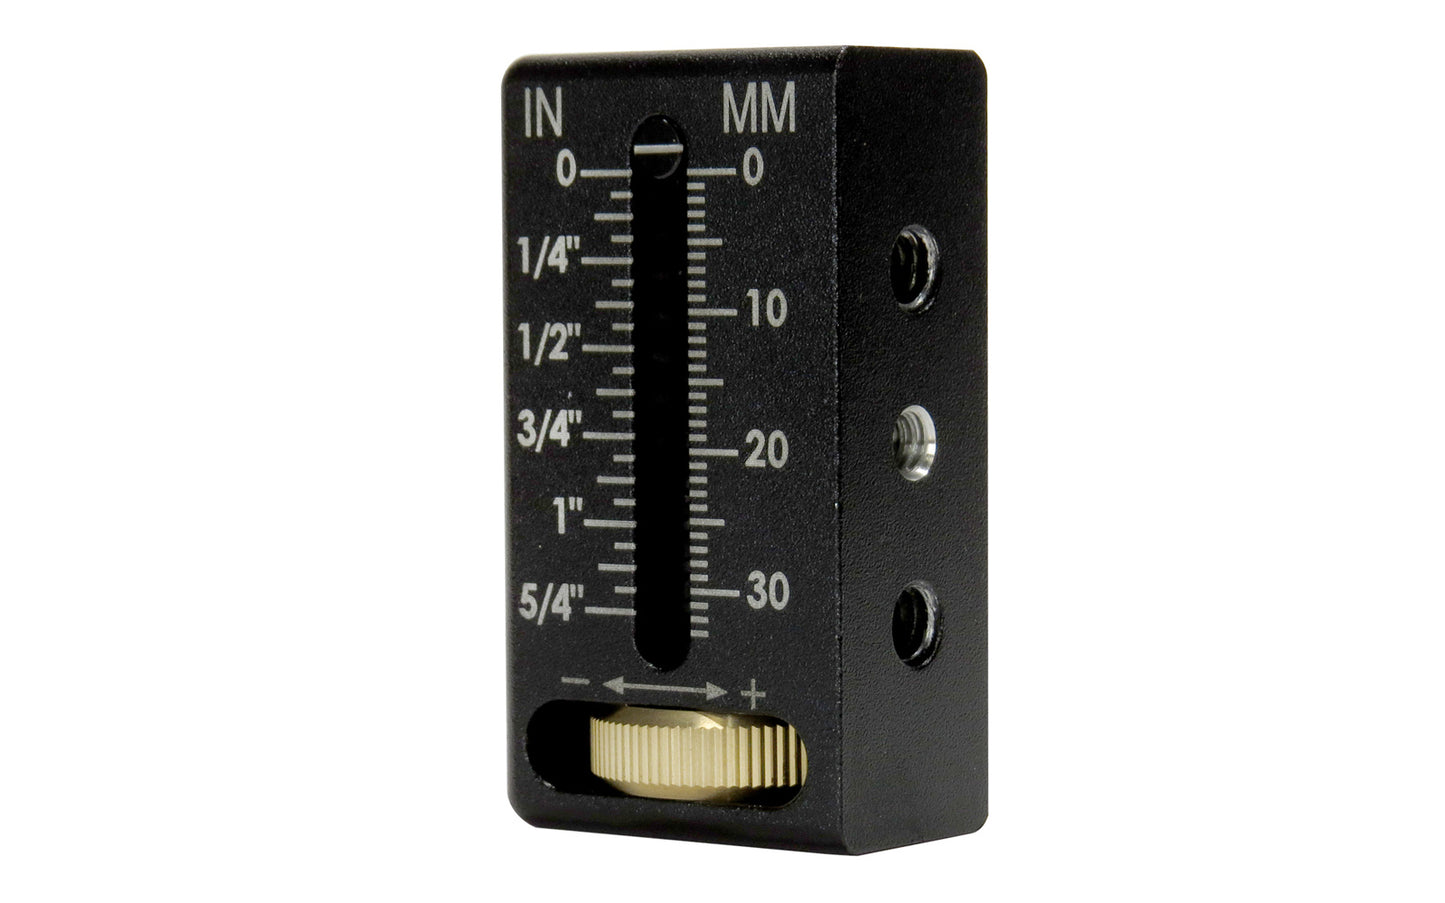 FastCap How Far Out? Universal Add-On Level Gauge Stabila - Model HOW FAR OUT STABILA ~ Fits Stabila 96 / 196 type levels & levels at least 2-3/8" tall